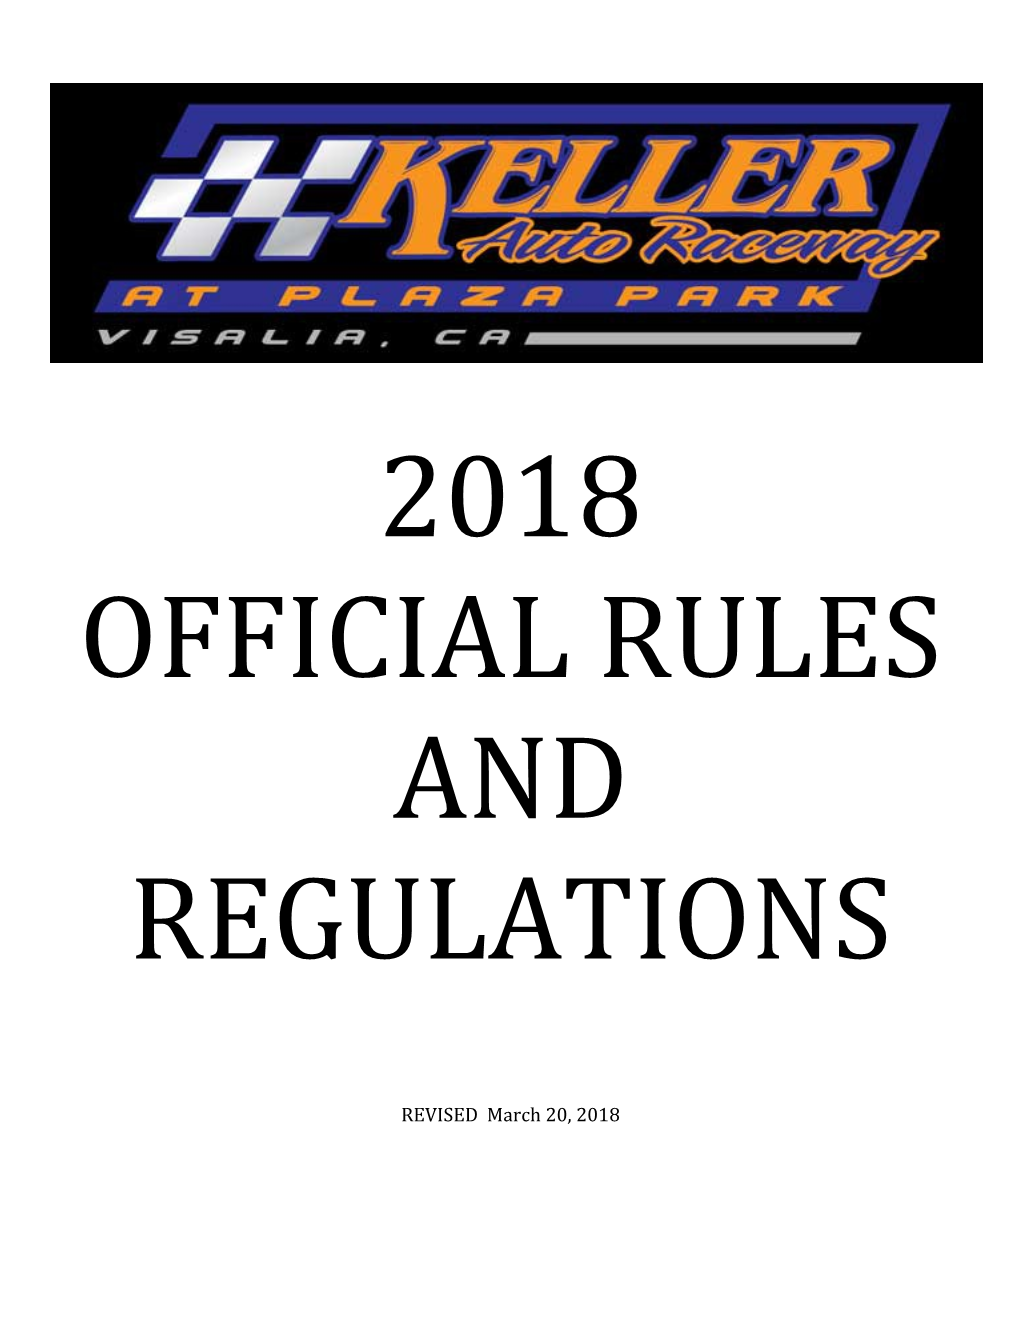 Section 1: General Rules Andregulations